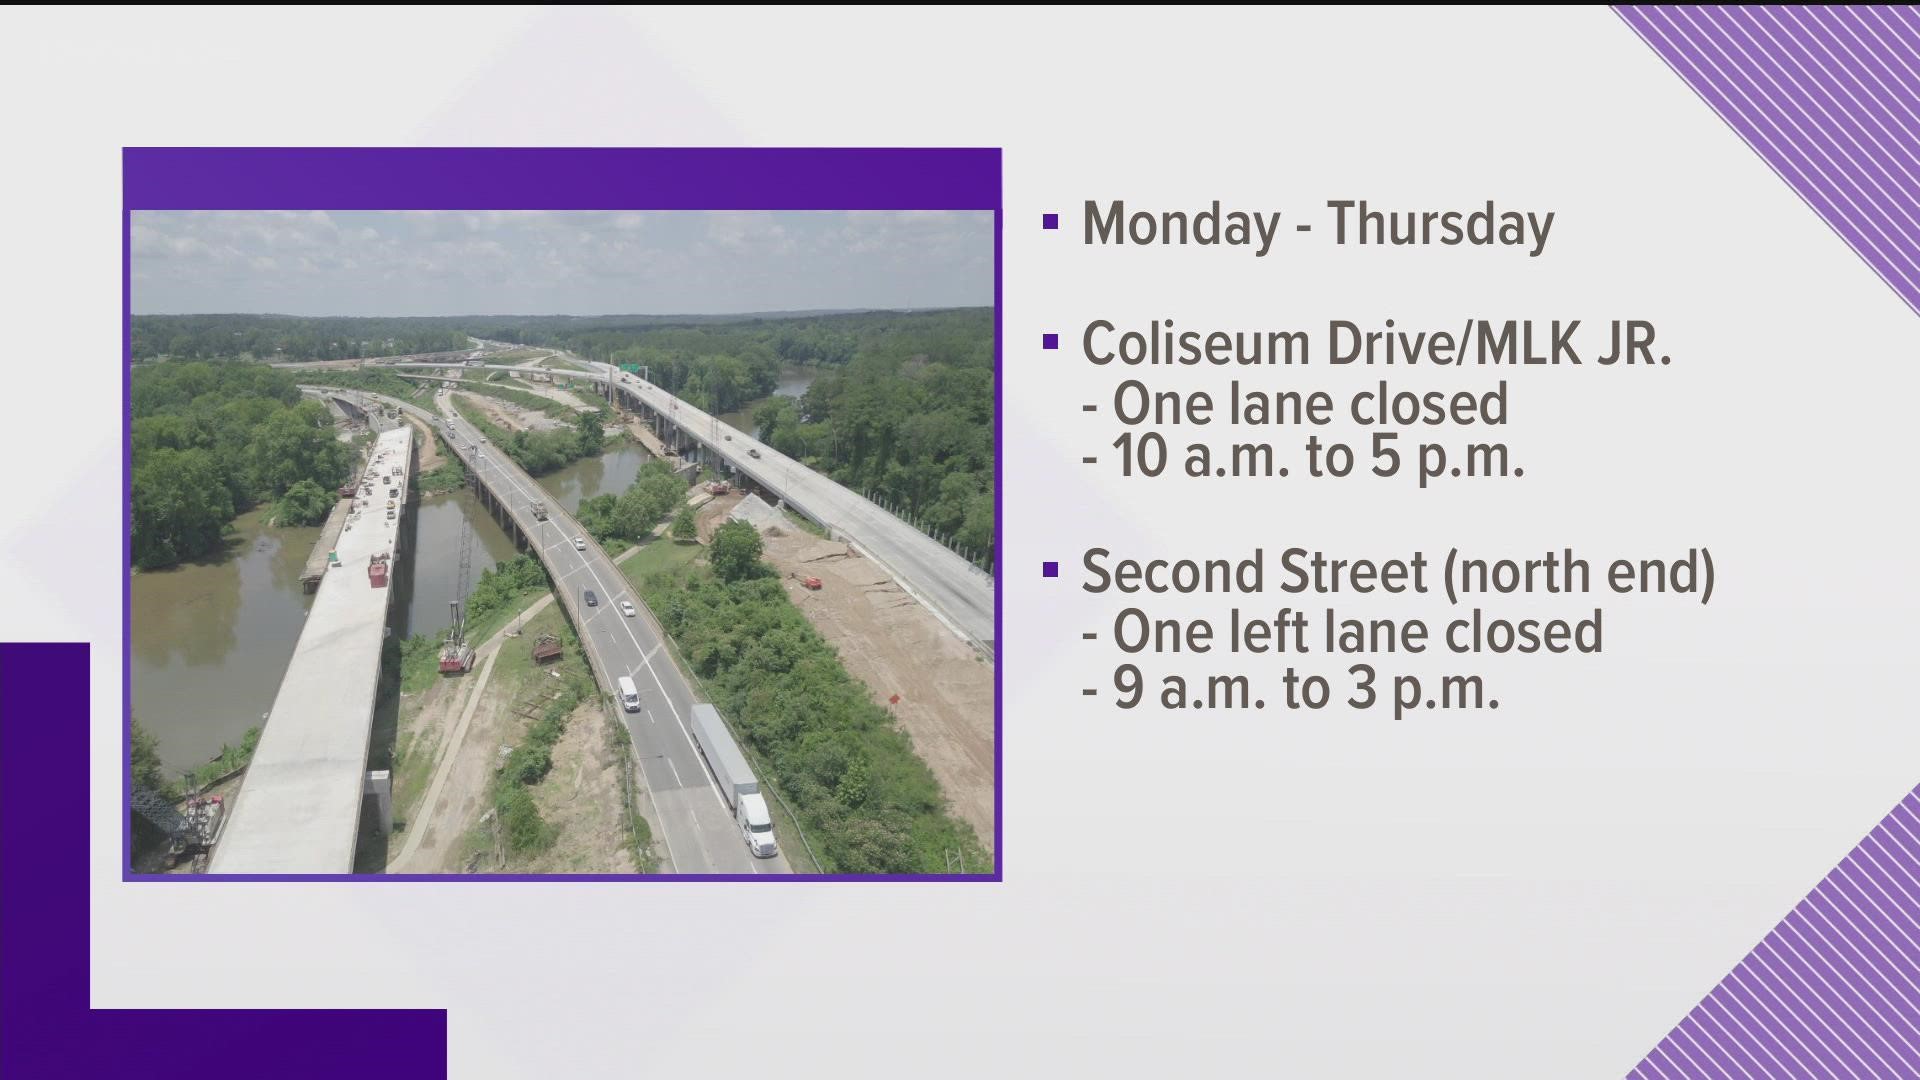 There will be some shifts this week as construction continues on the I-16/I-75 interstate project in Macon-Bibb, according to GDOT